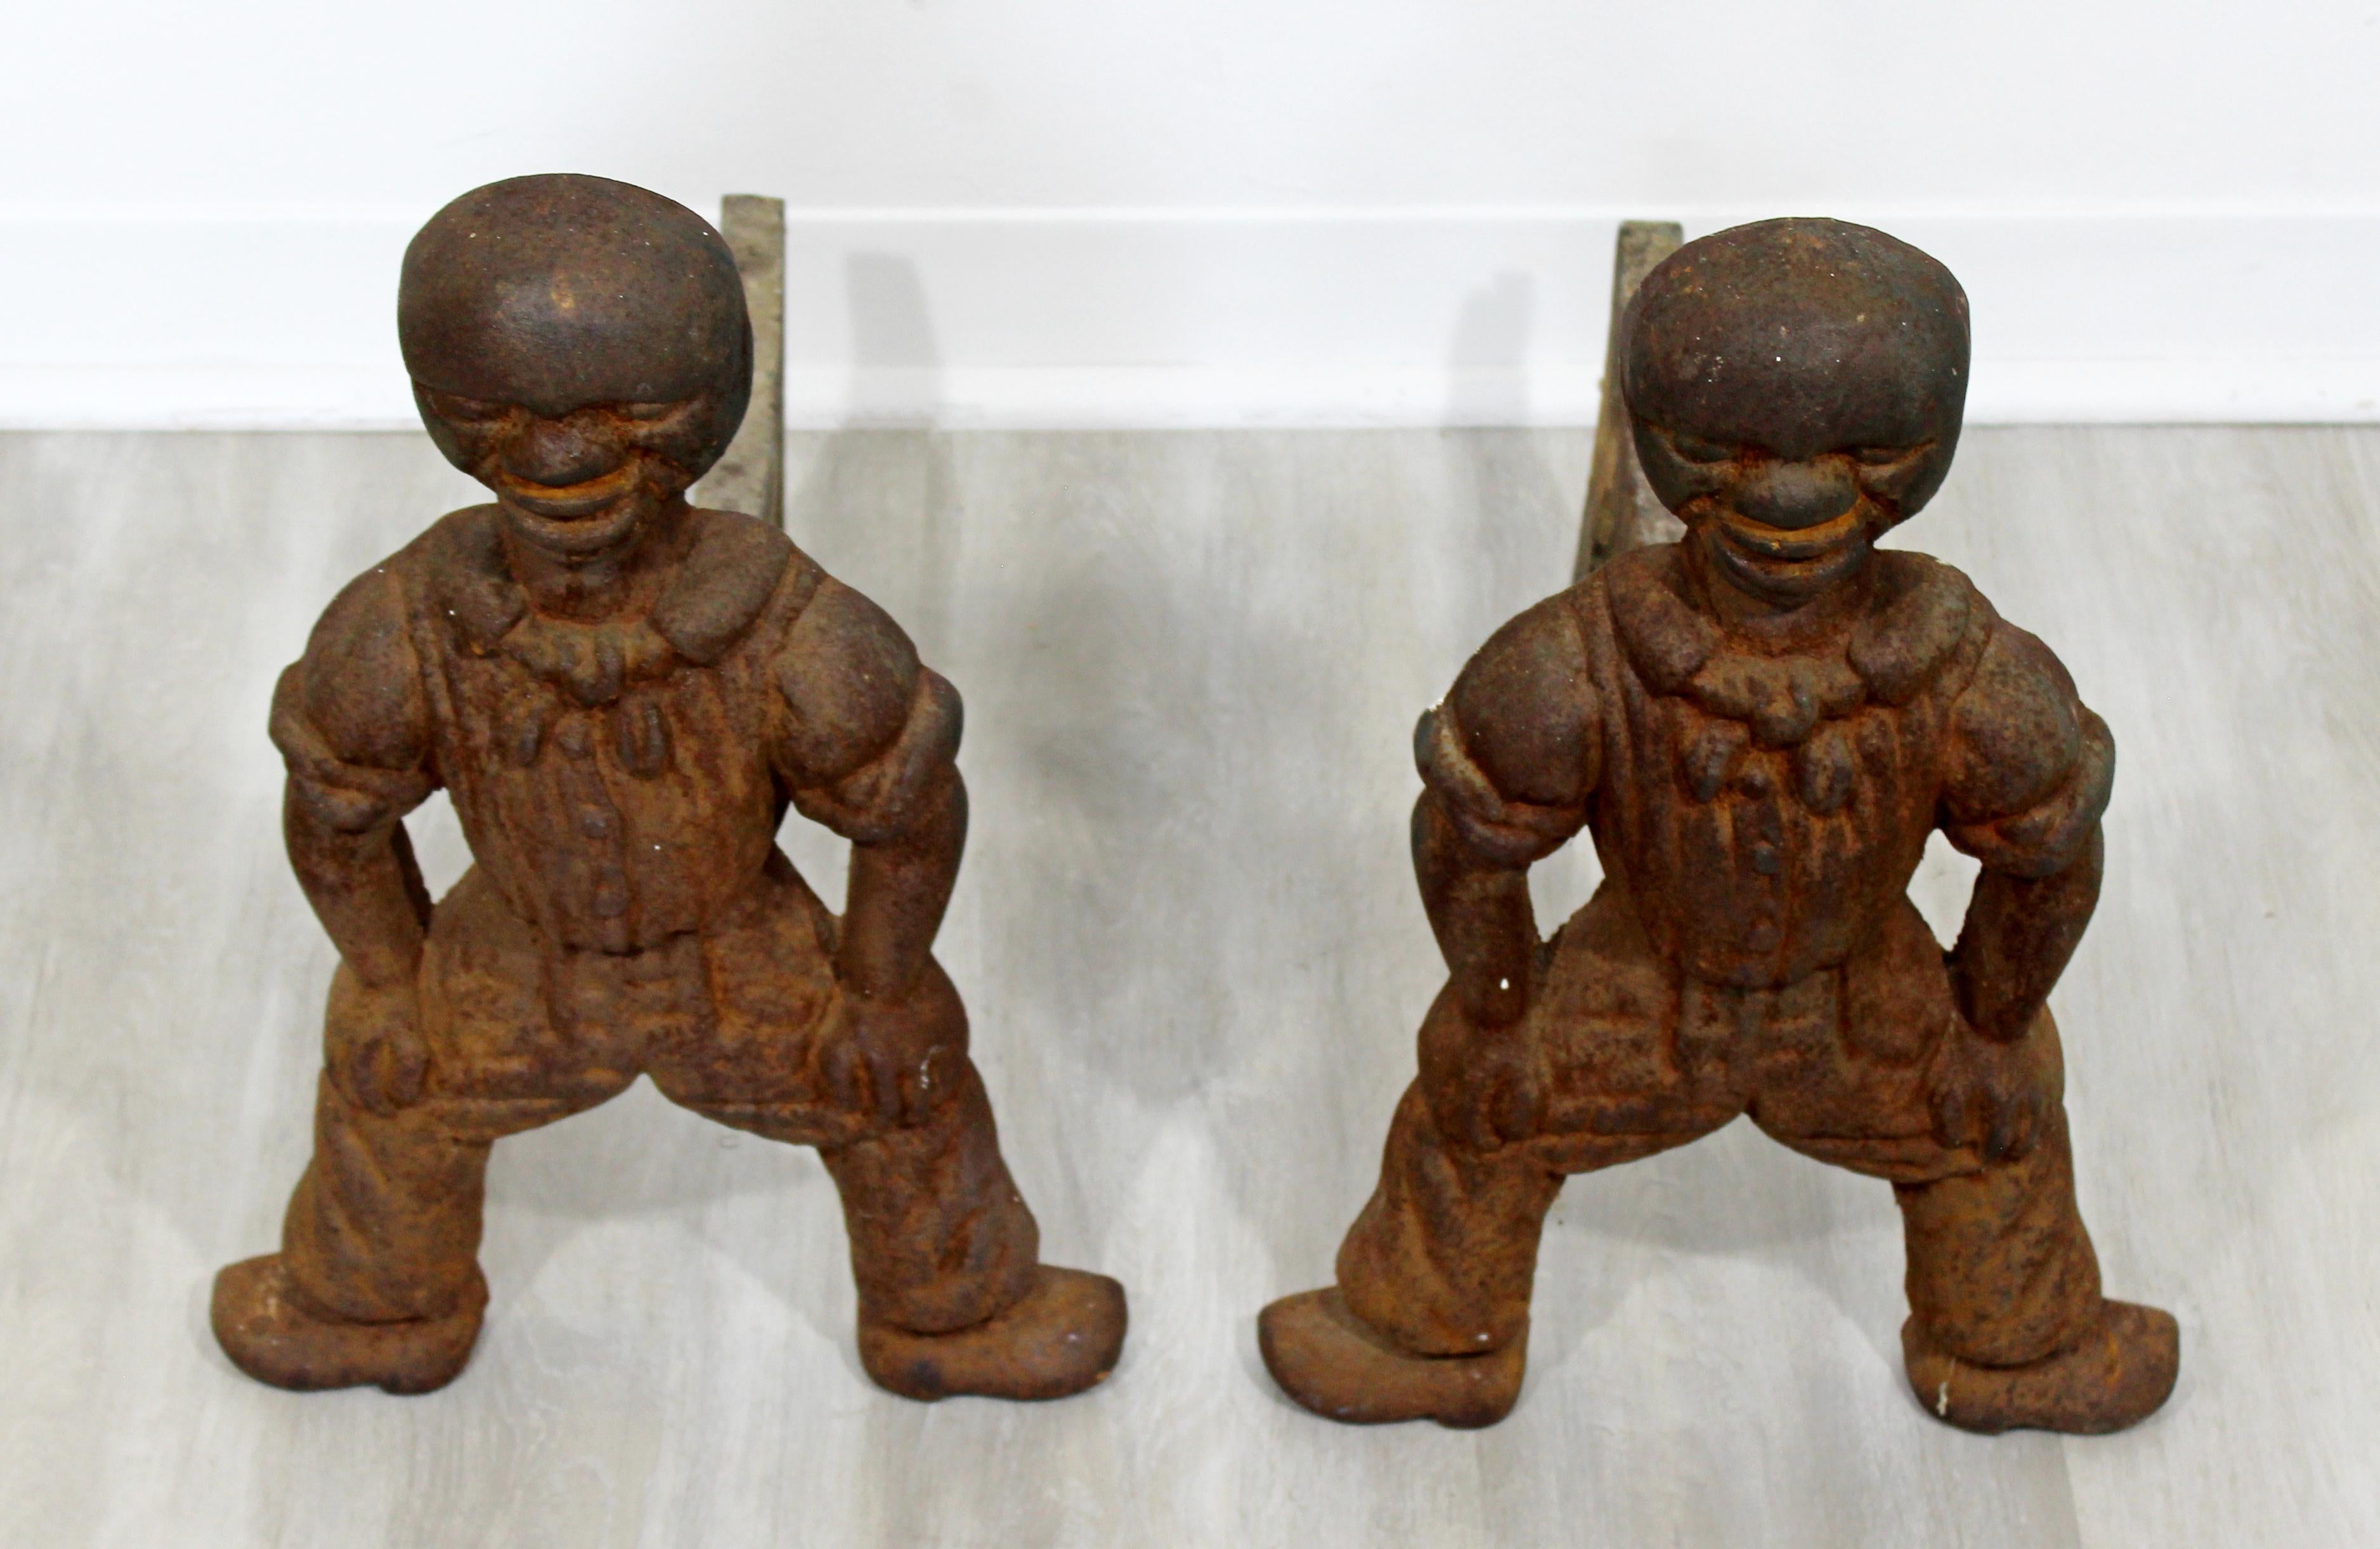 For your consideration is an interesting pair of antique, Brutalist, African Art iron andirons, in the shape of figurines. In excellent condition, with age appropriate wear and patina. The dimensions of each are 12